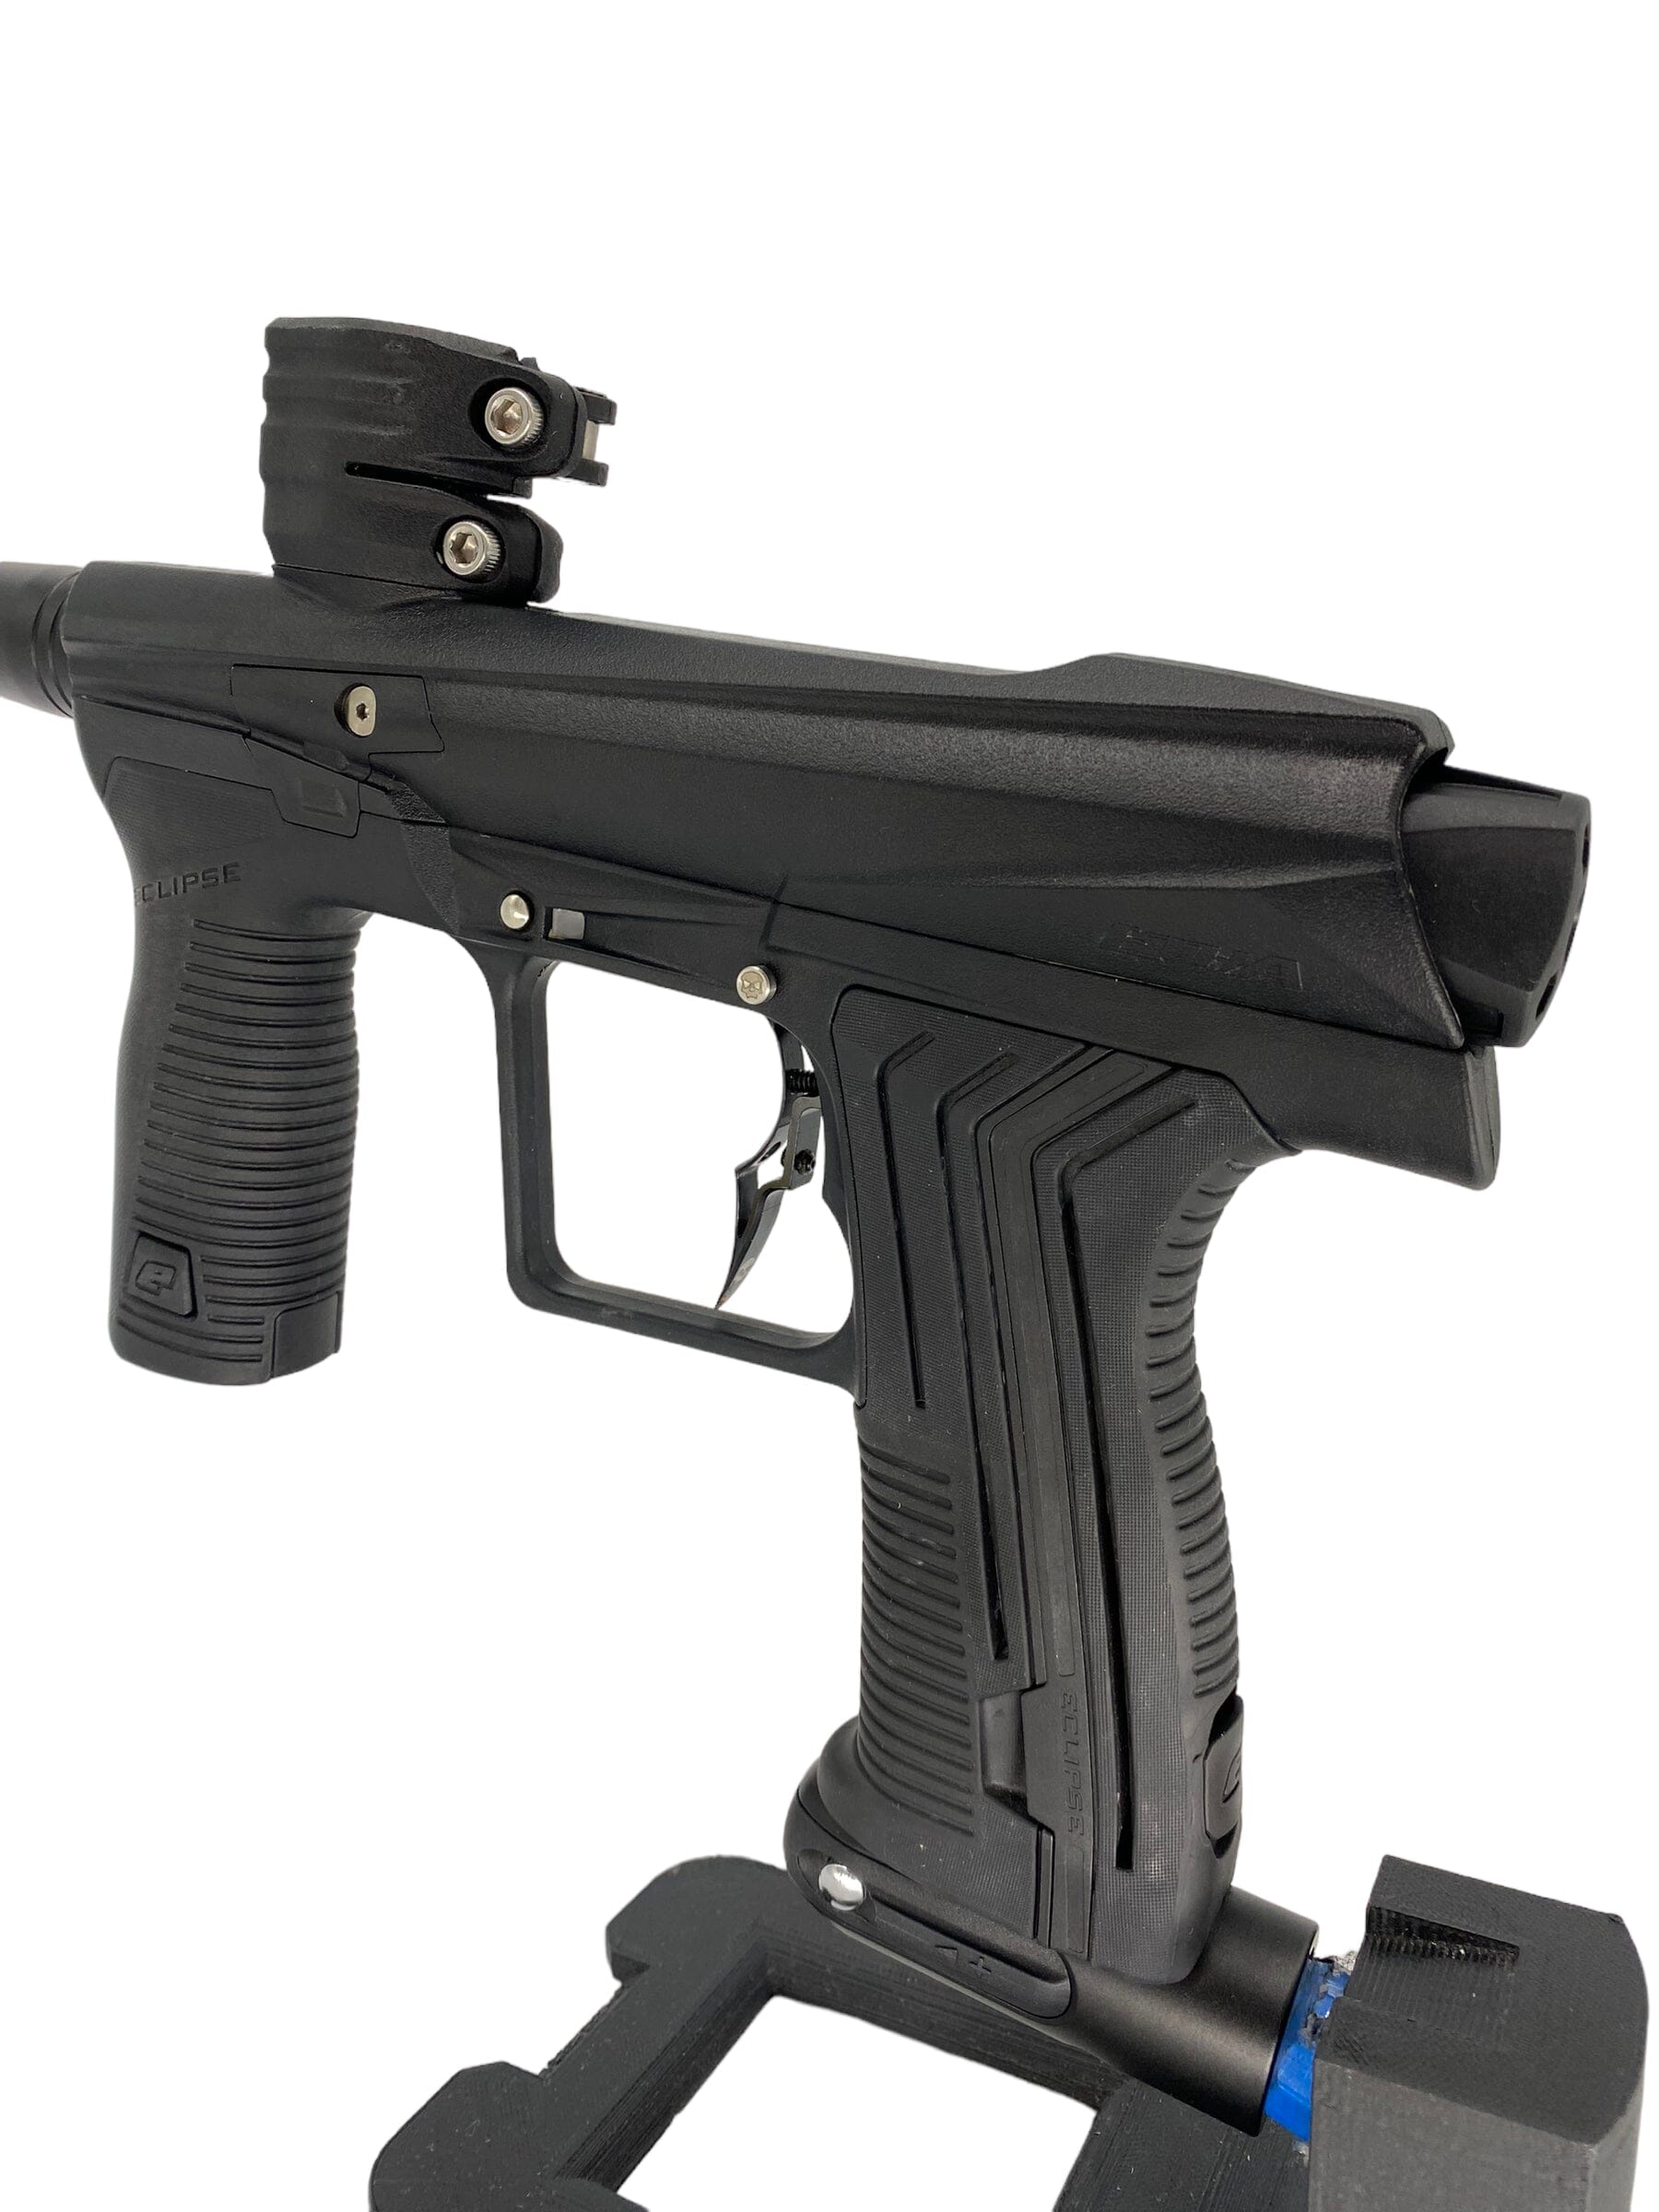 Used Planet Eclipse Etha 2 PAL Paintball Gun from CPXBrosPaintball Buy/Sell/Trade Paintball Markers, Paintball Hoppers, Paintball Masks, and Hormesis Headbands